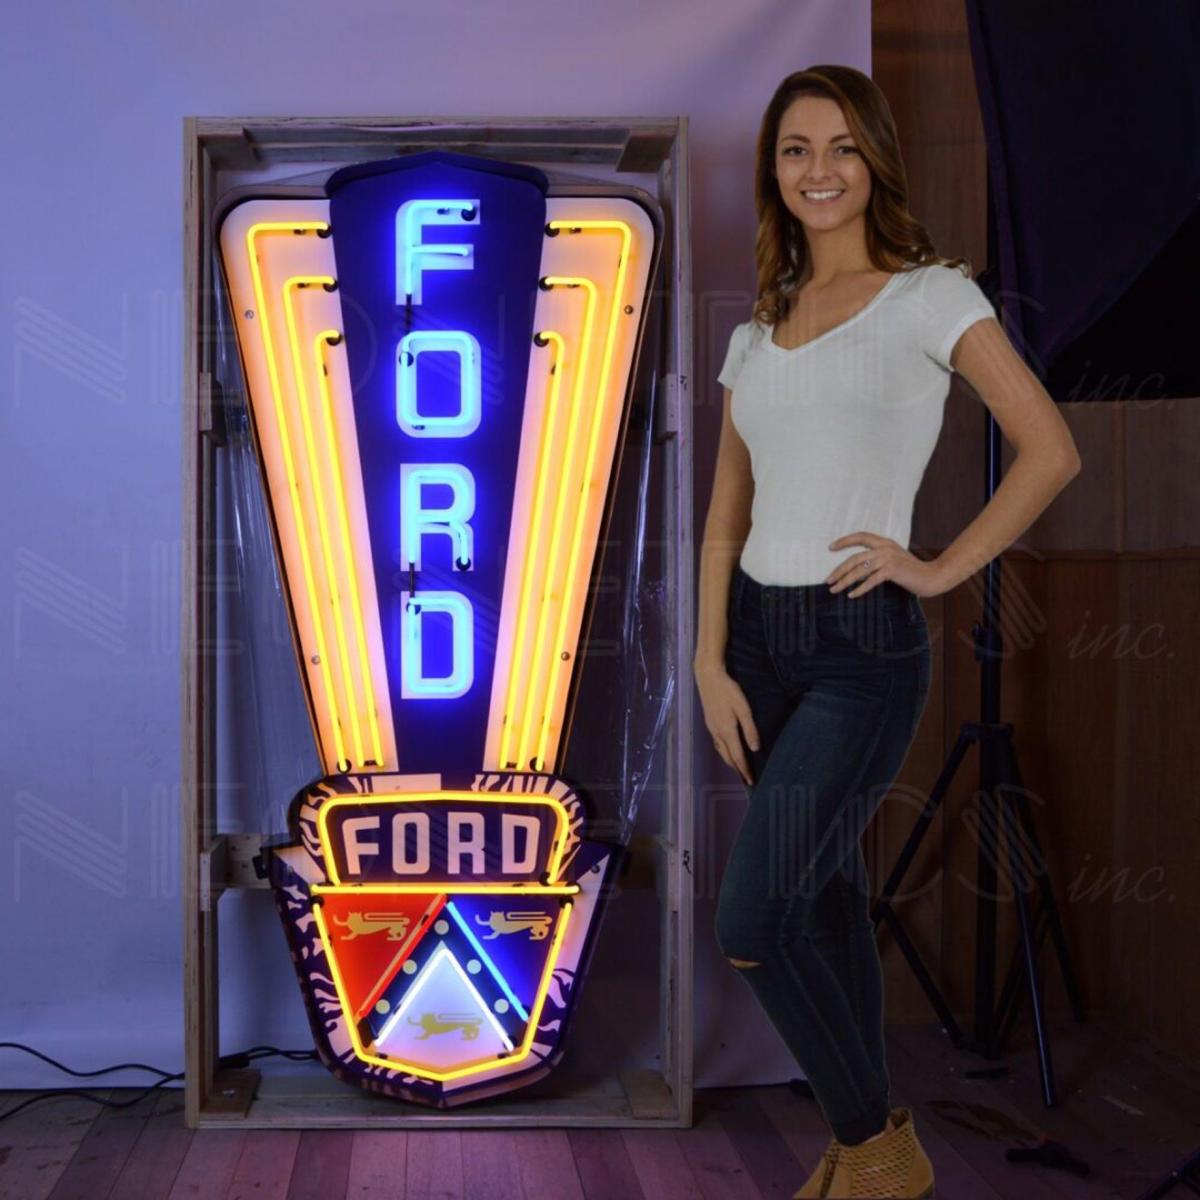 FORD JUBILEE CREST NEON SIGN *NO RESERVE*